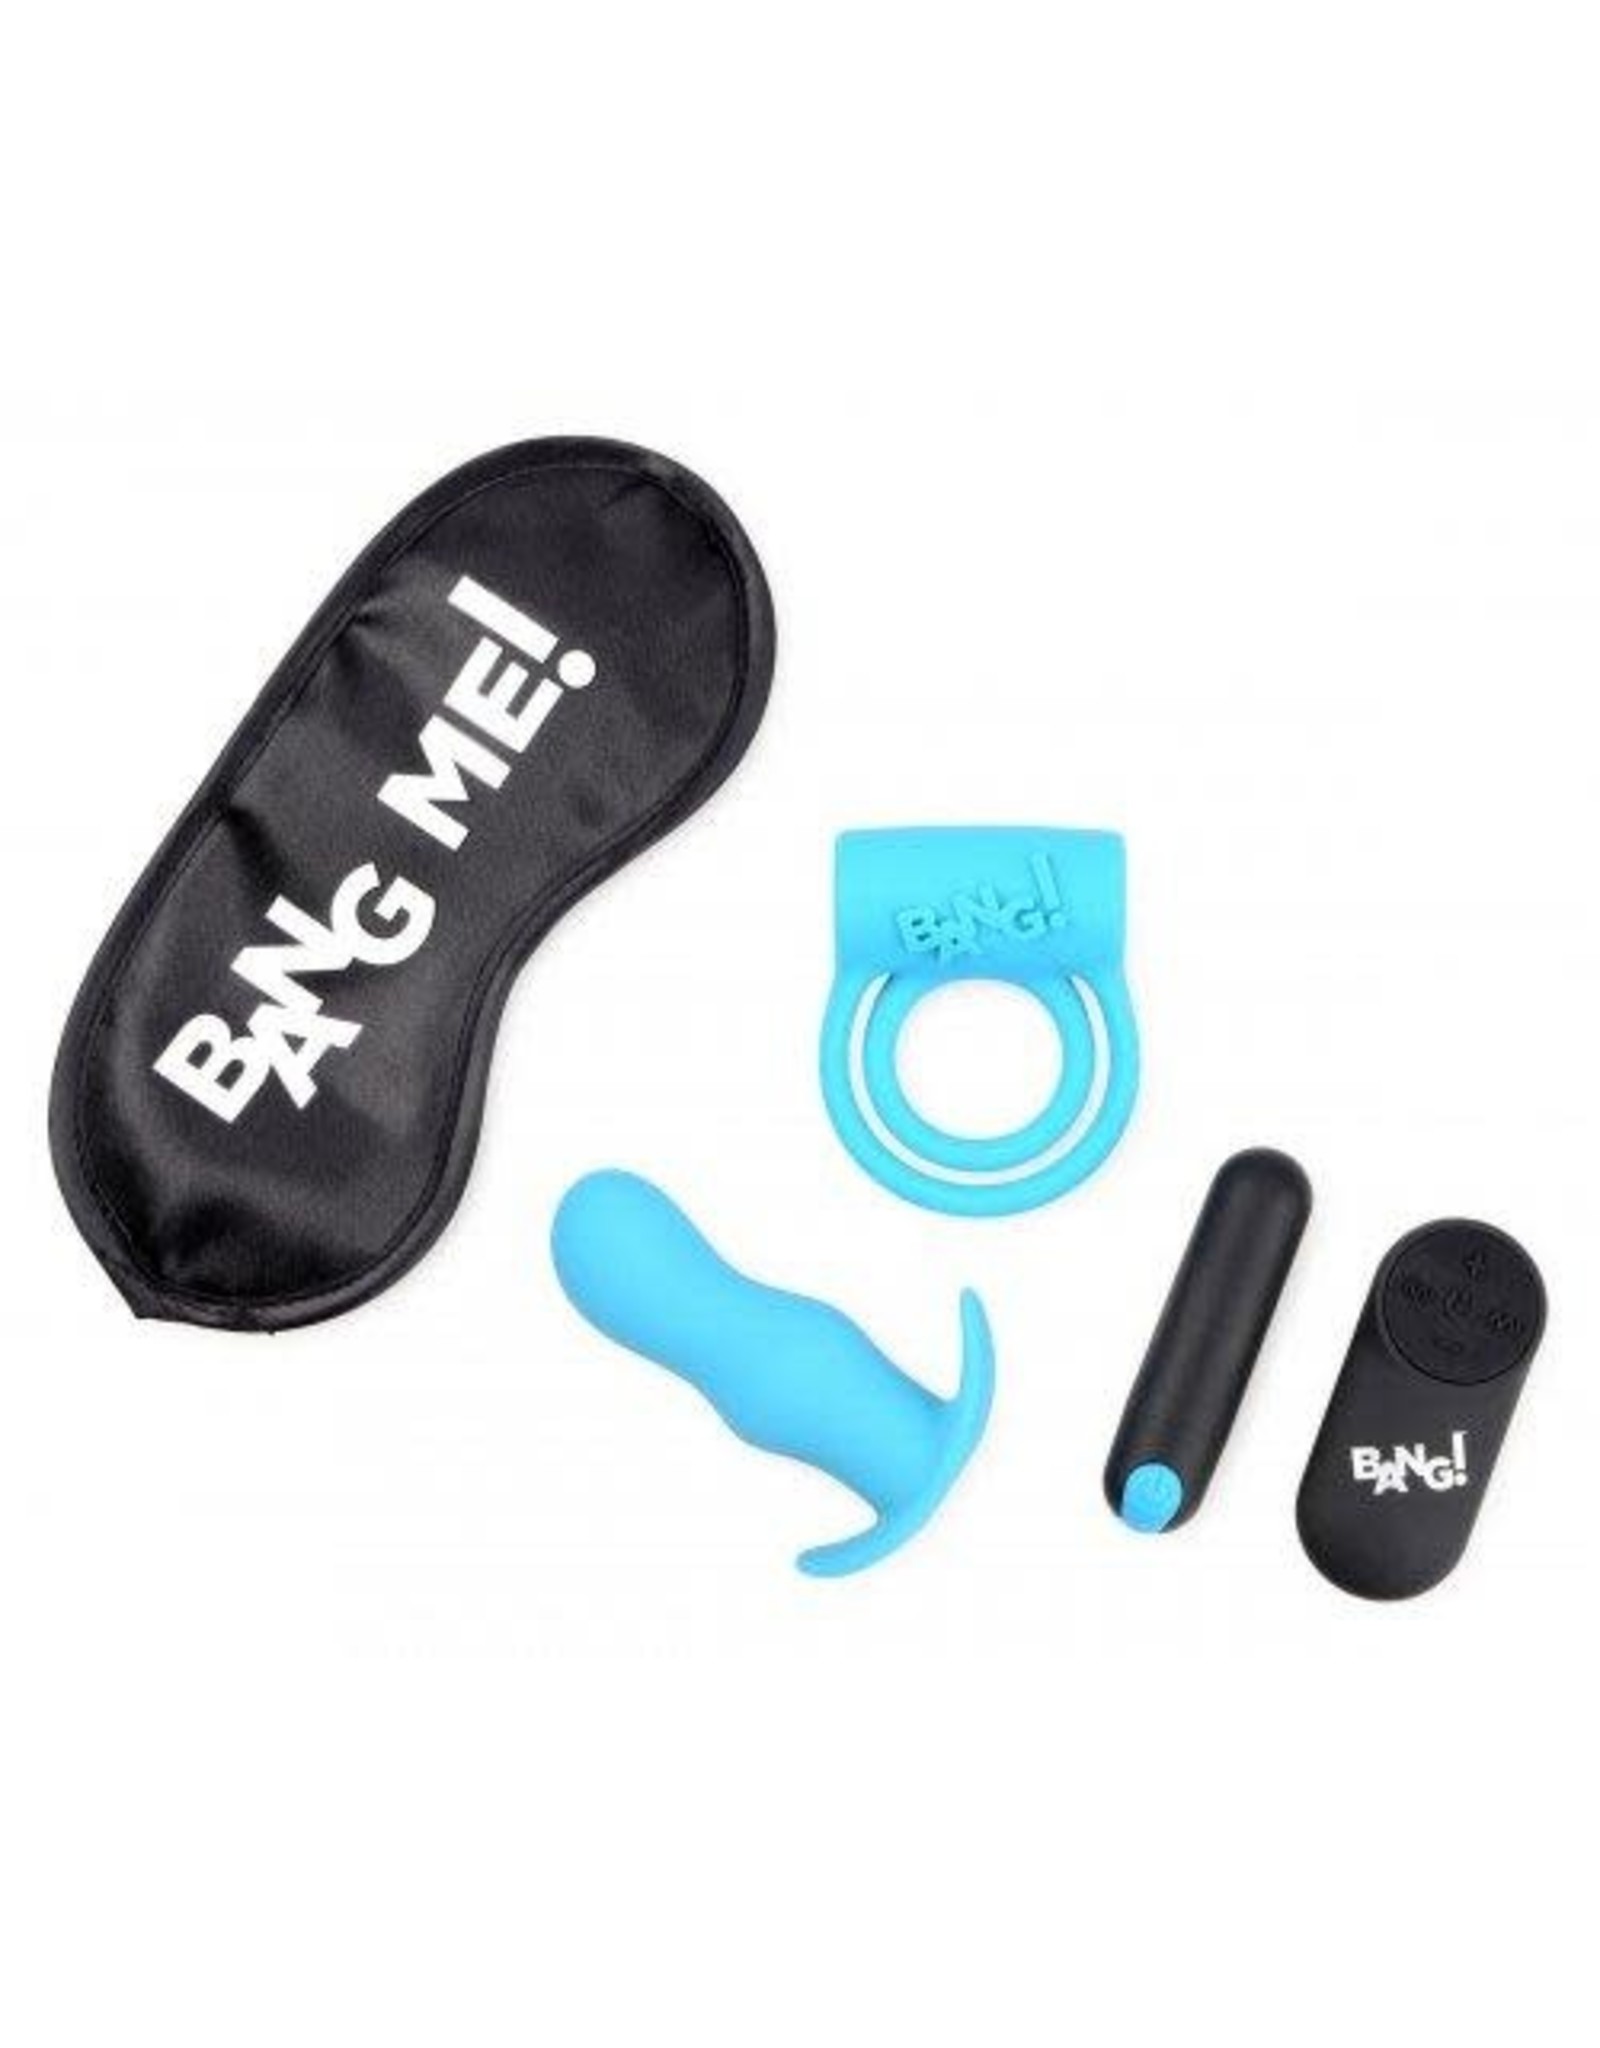 XR Brands Bang! Duo Blast Remote Control Cock Ring and Butt Plug Vibe Kit